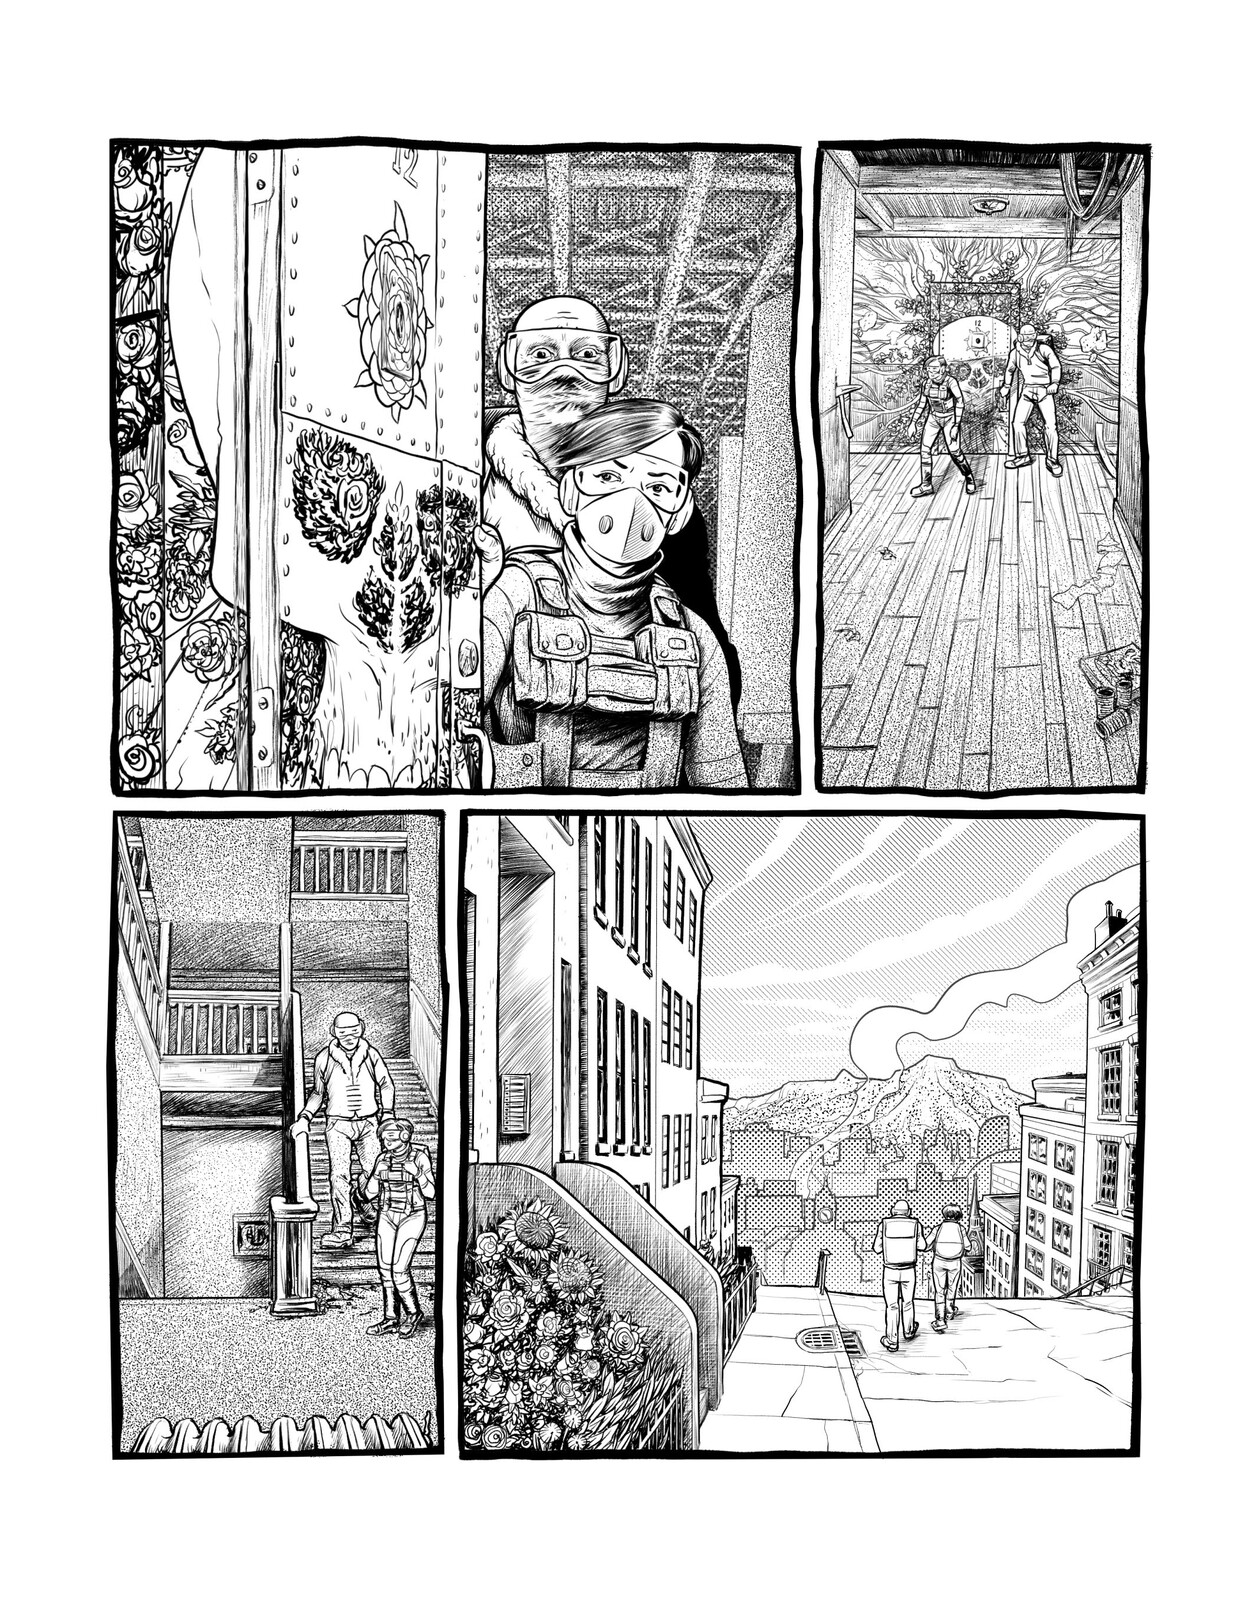 Bloom page two. A short Sci Fi comic.